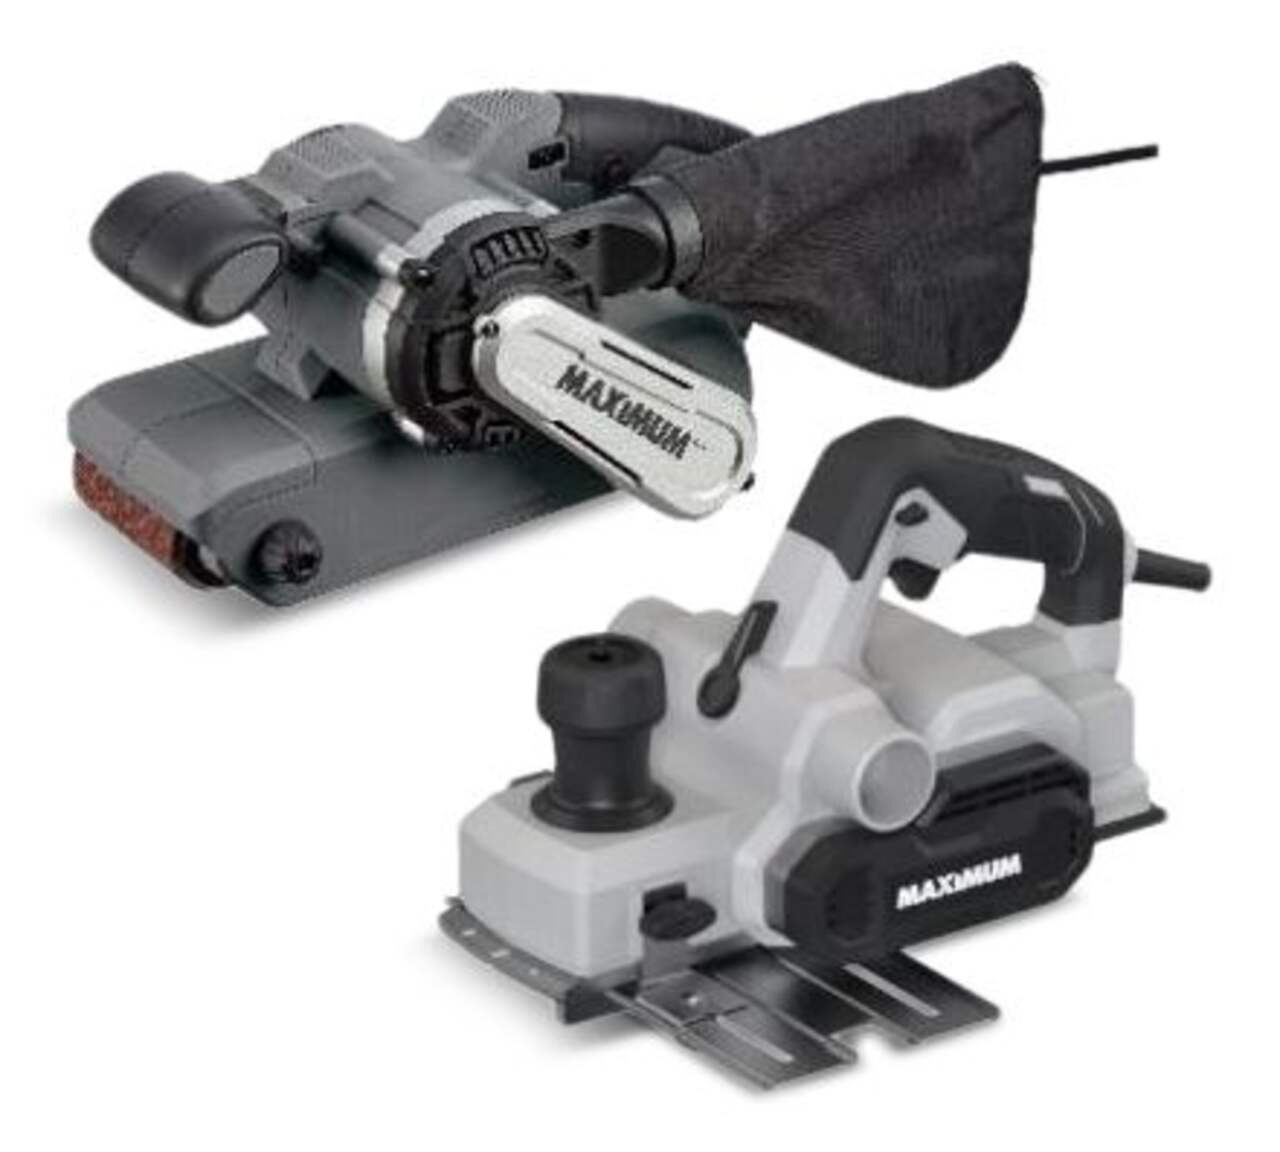 https://media-www.canadiantire.ca/product/fixing/tools/portable-power-tools/4990903/maximum-3-1-4-hand-planer-3-x-21-belt-sander-c22c002e-a80c-4d0e-ae3b-907dca13b3b8-jpgrendition.jpg?imdensity=1&imwidth=640&impolicy=mZoom